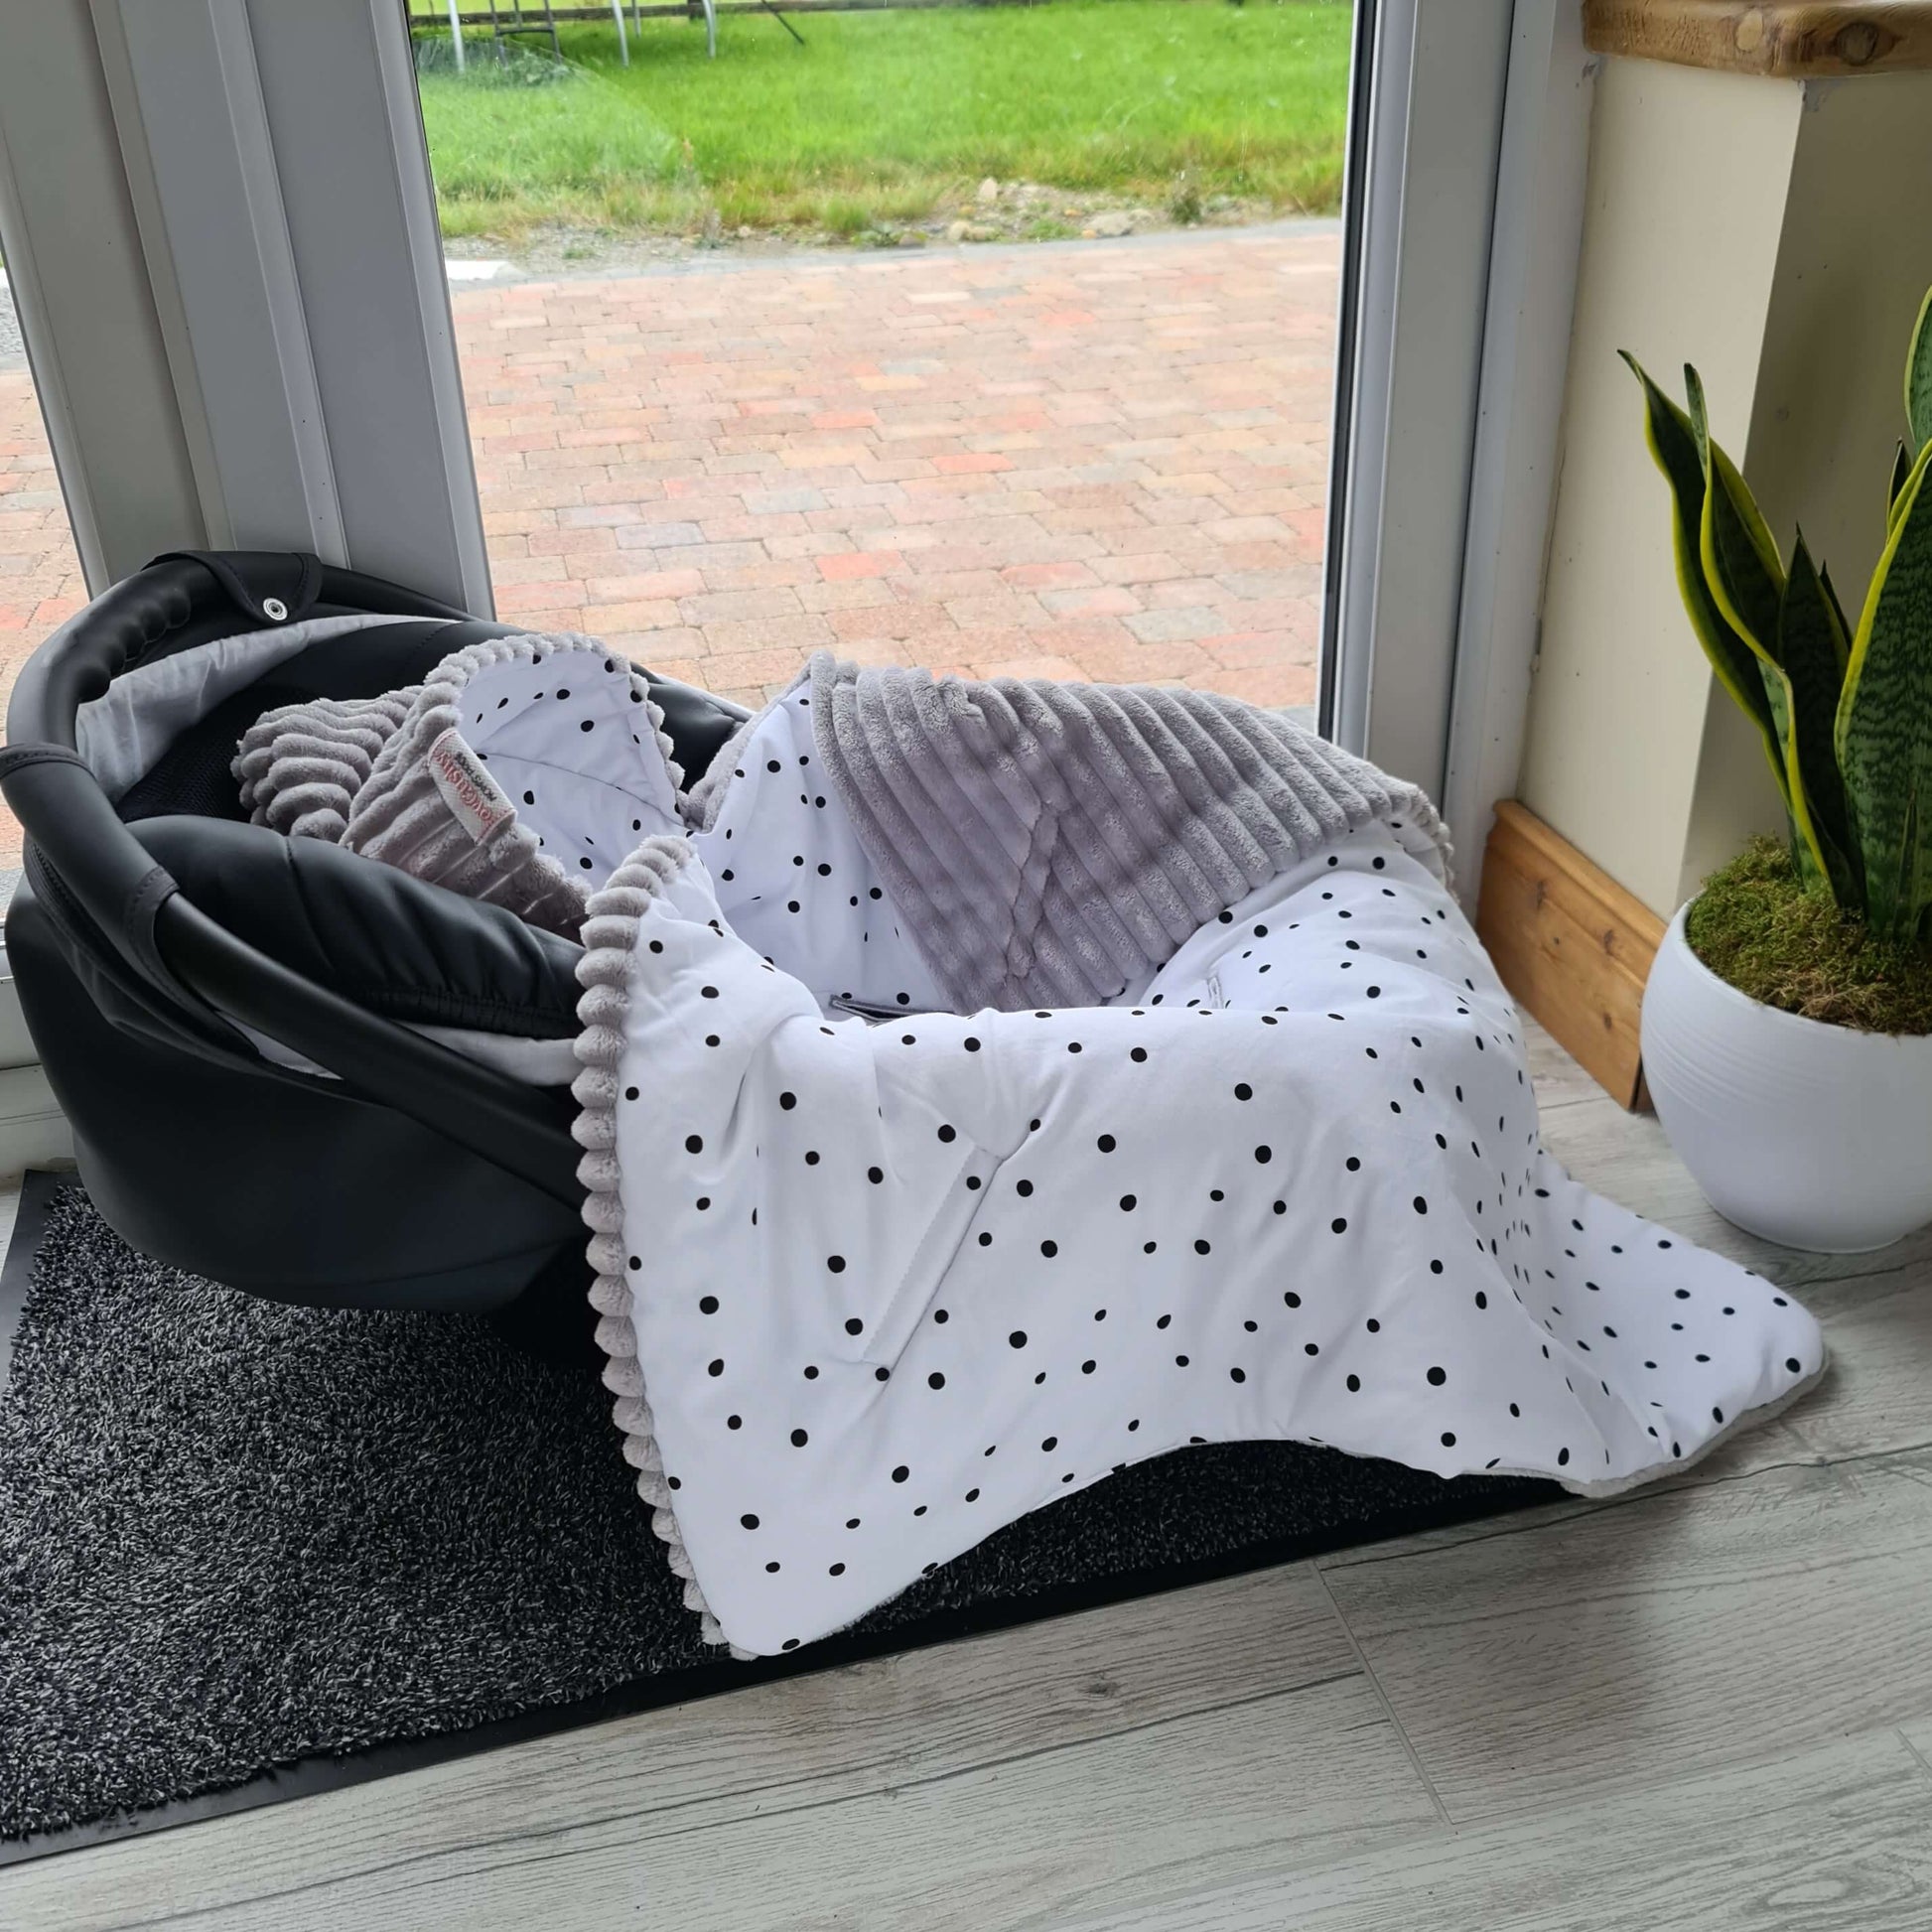 car seat blanket for infants grey cosy fleece and polka dot pattern soft 100% cotton